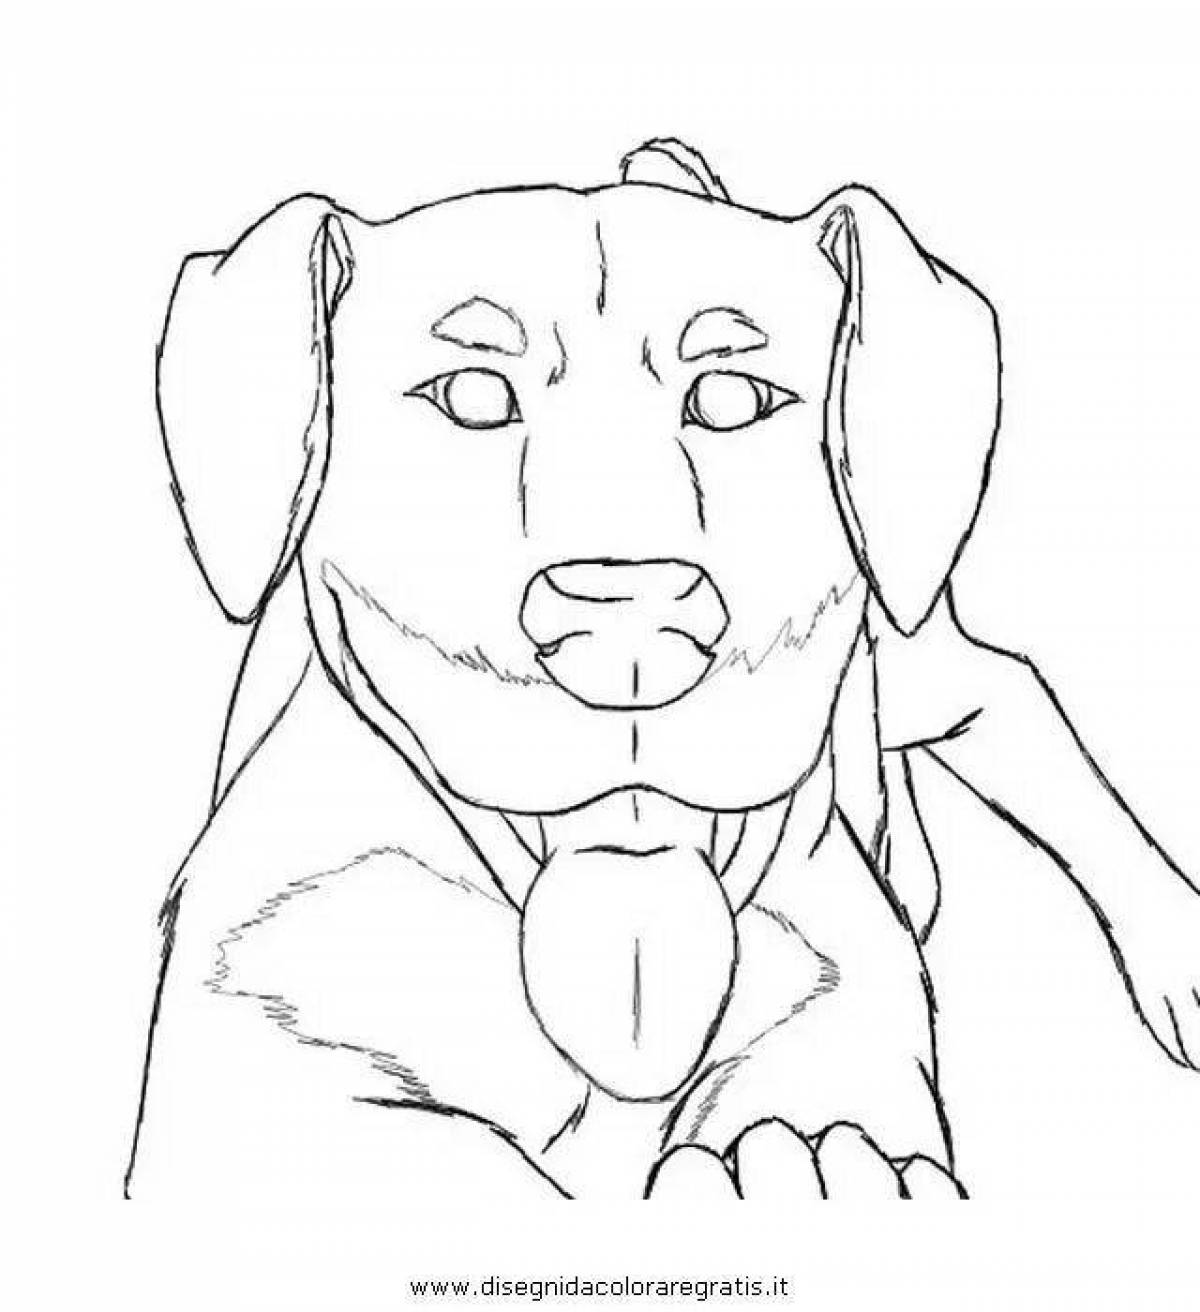 Coloring page affectionate rottweiler